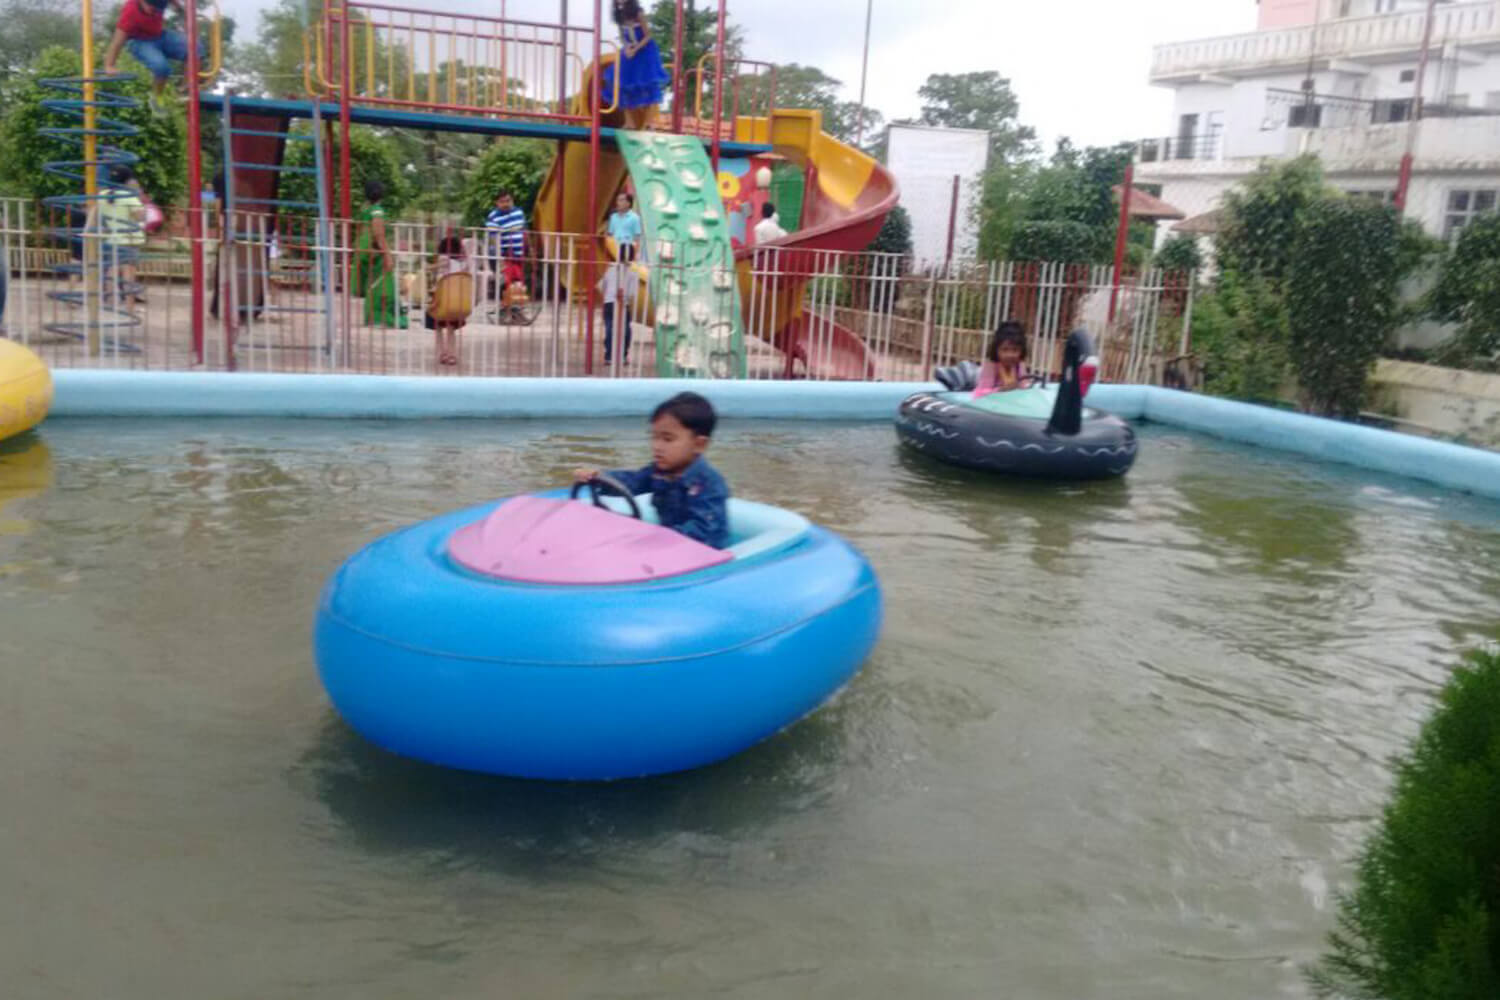 Bumper Boats manufacturers, suppliers, distributors, and dealers across India